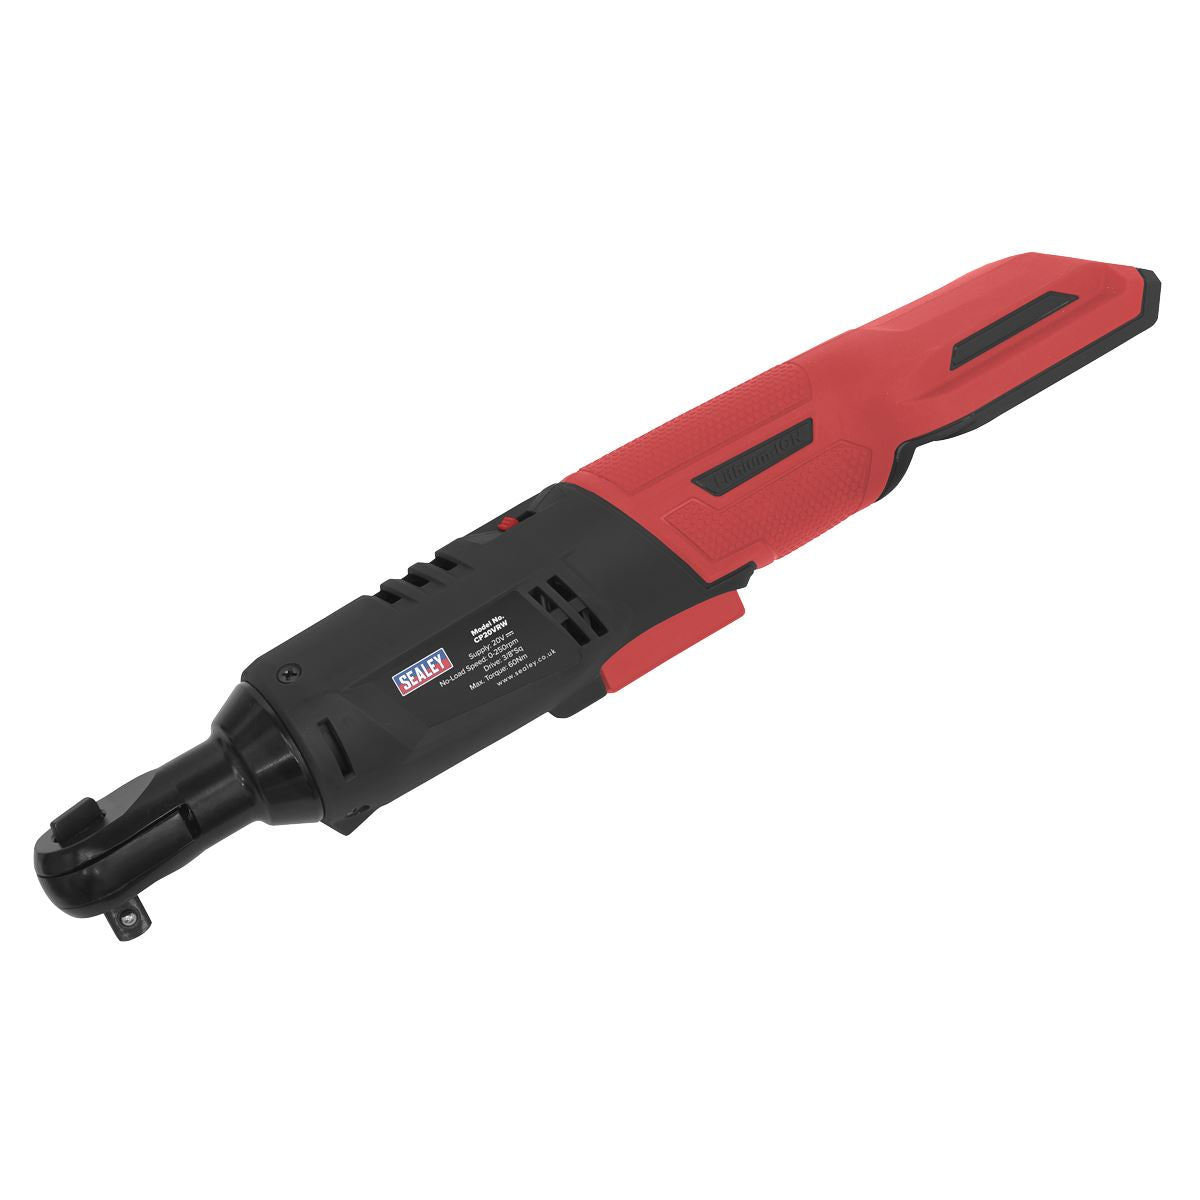 Sealey Ratchet Wrench 20V 3/8"Sq Drive 60Nm - Body Only CP20VRW